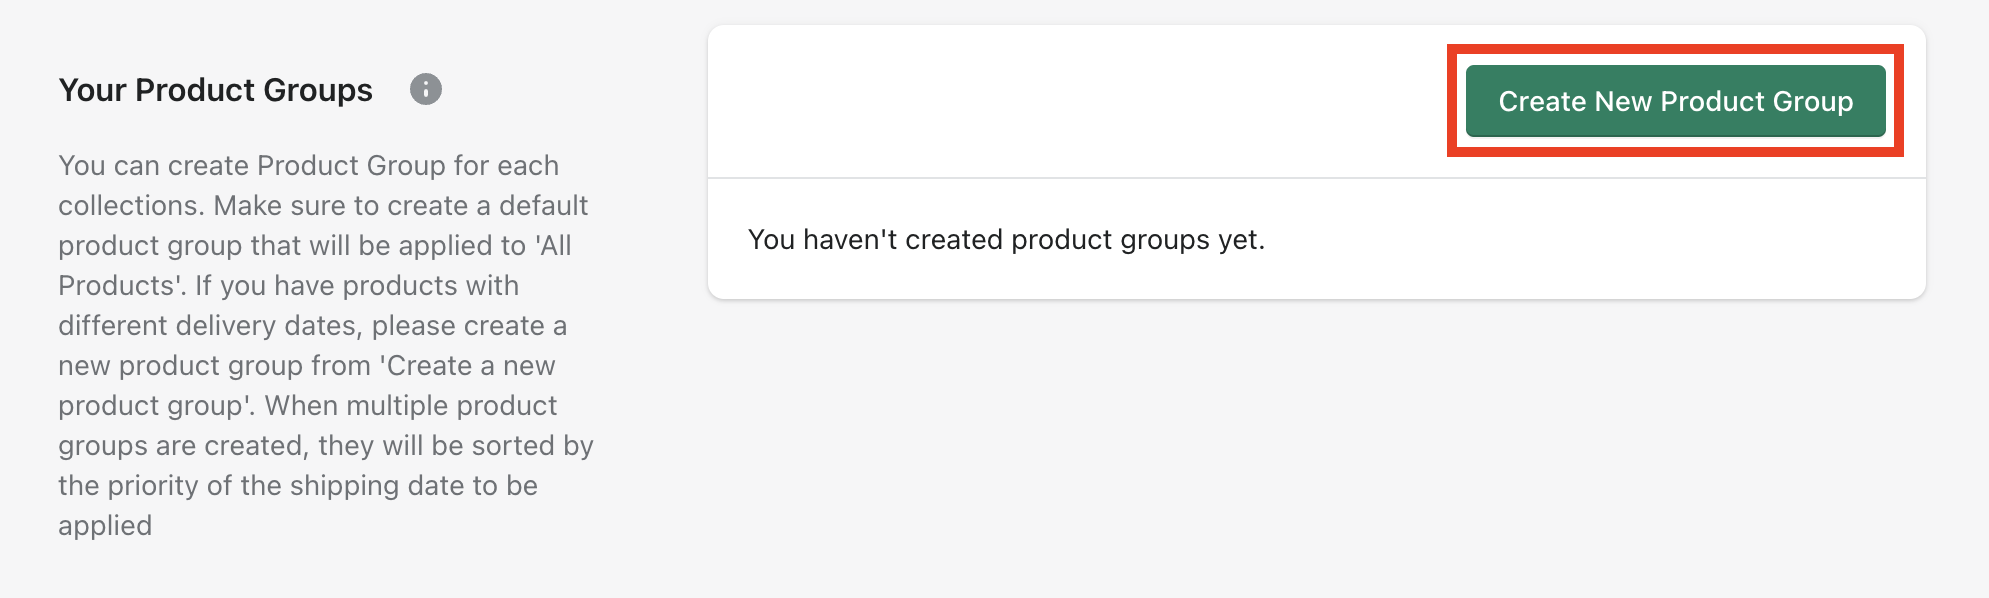 01-04-No_Product_Group.png